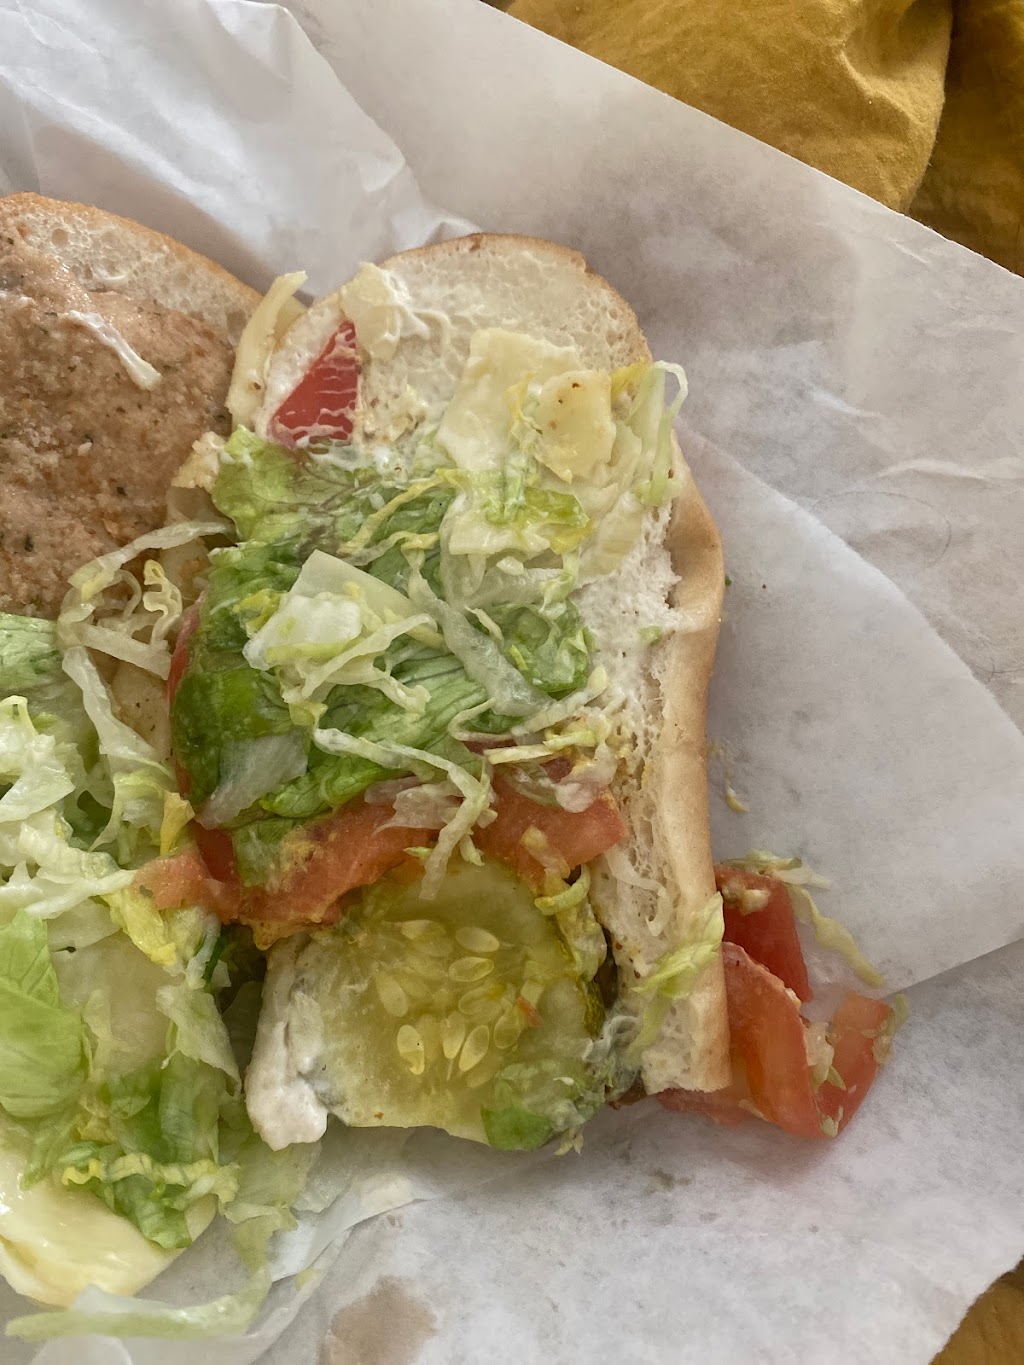 Johns Import Deli | 98 N Main St, Winsted, CT 06098 | Phone: (860) 379-1805